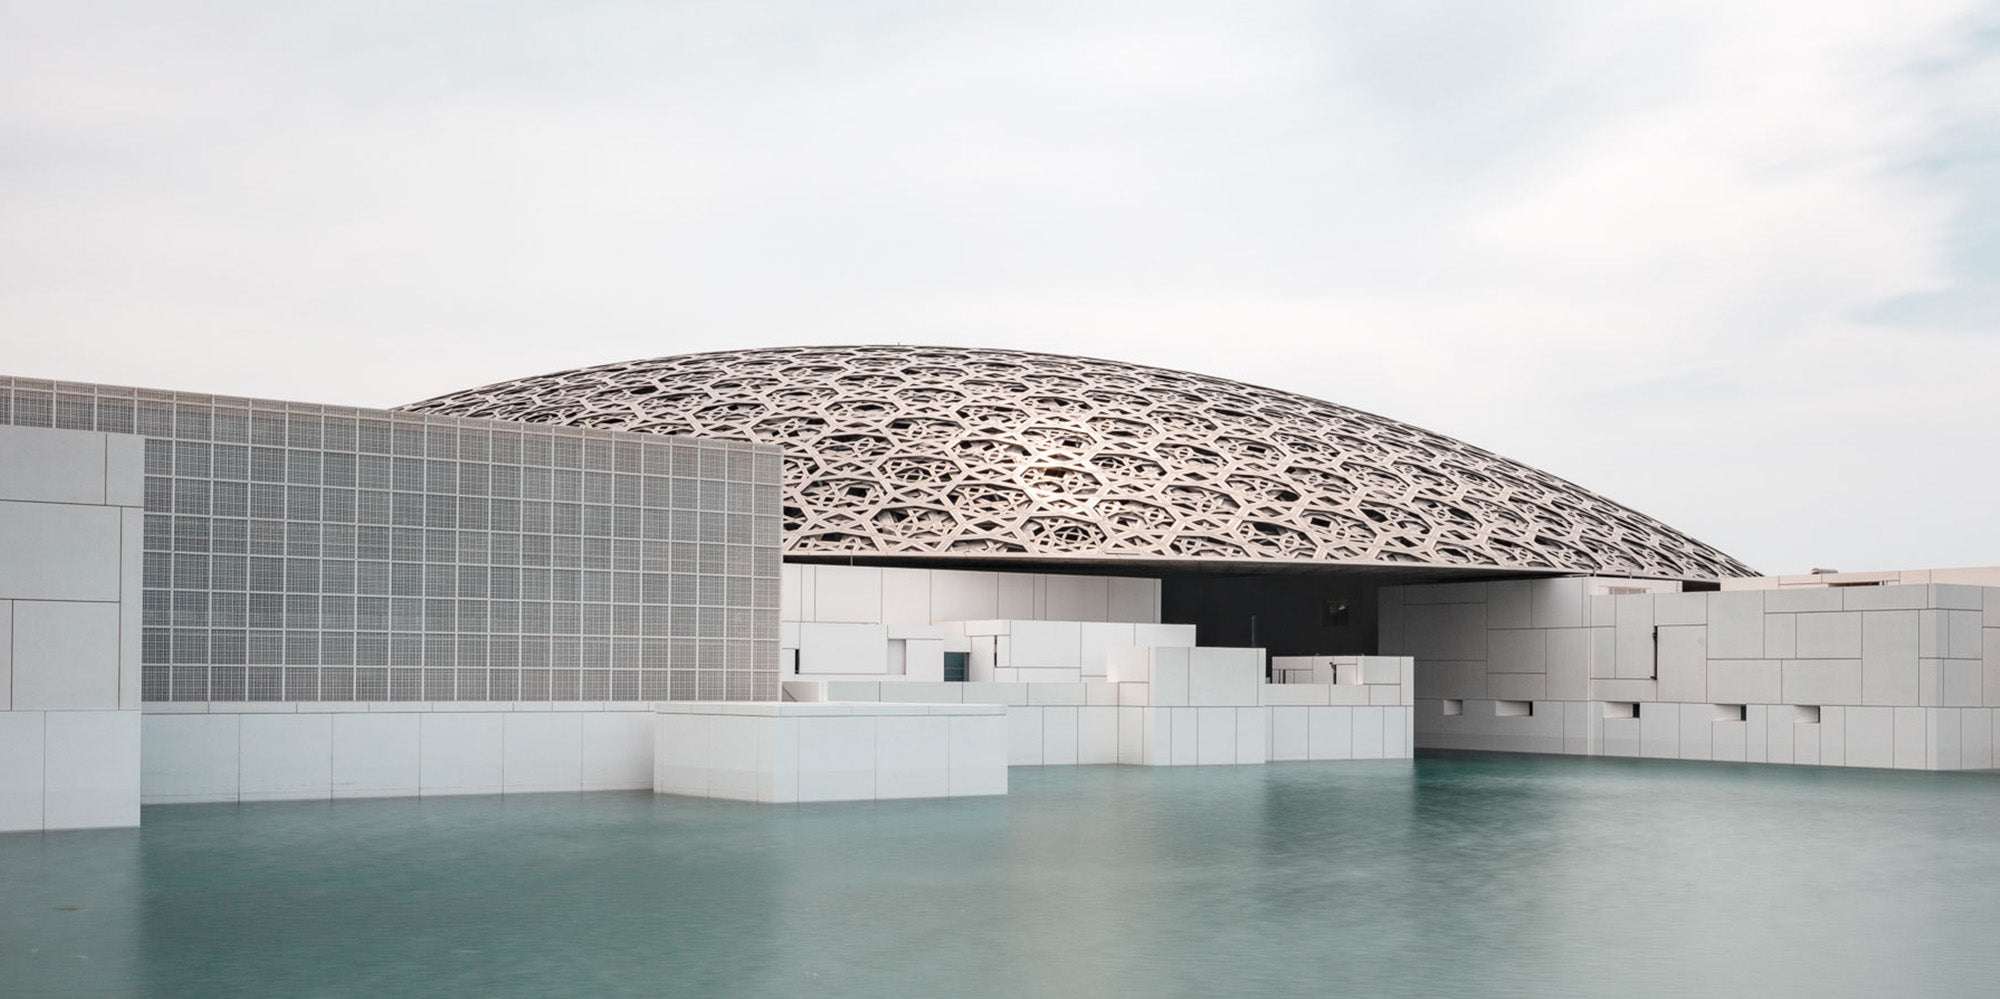 Wide-angle view of the Louvre Abu Dhabi’s intricate dome over calm water, under a soft sky.